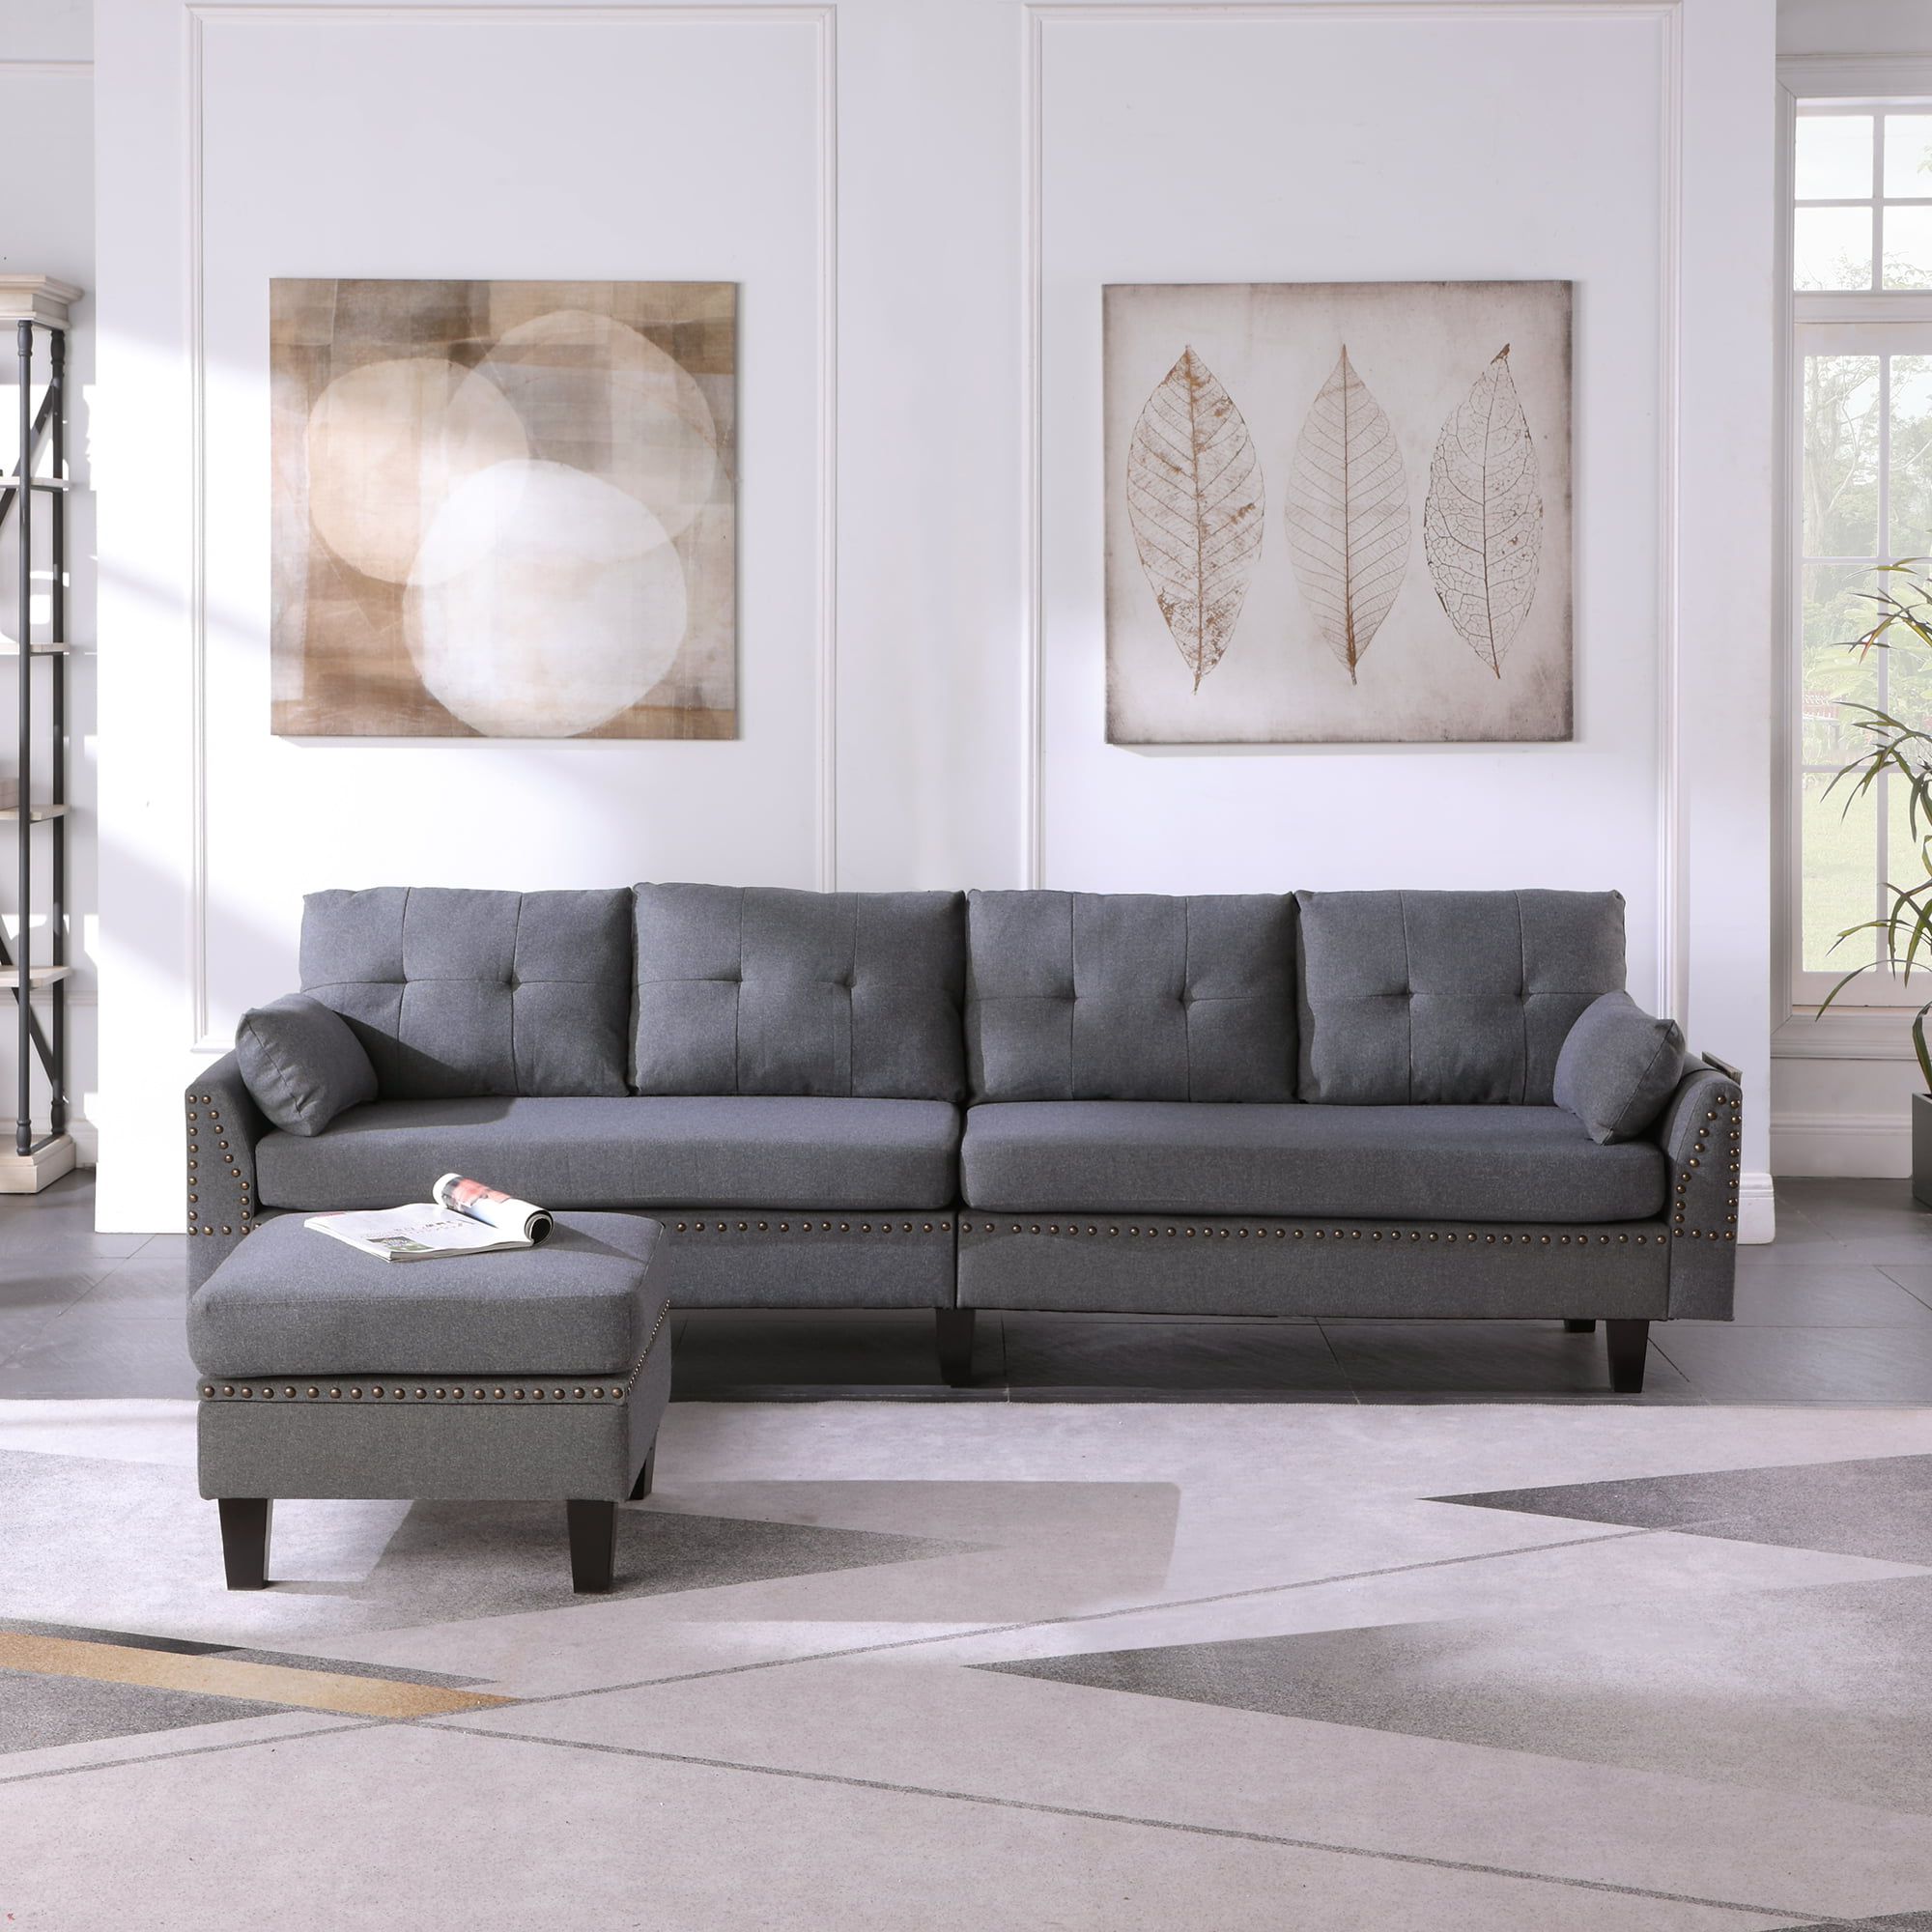 Urhomepro Mid Century Couches And Sofas With Ottoman, 2 Pillows, Modern Regarding Sofas With Ottomans (Gallery 18 of 20)